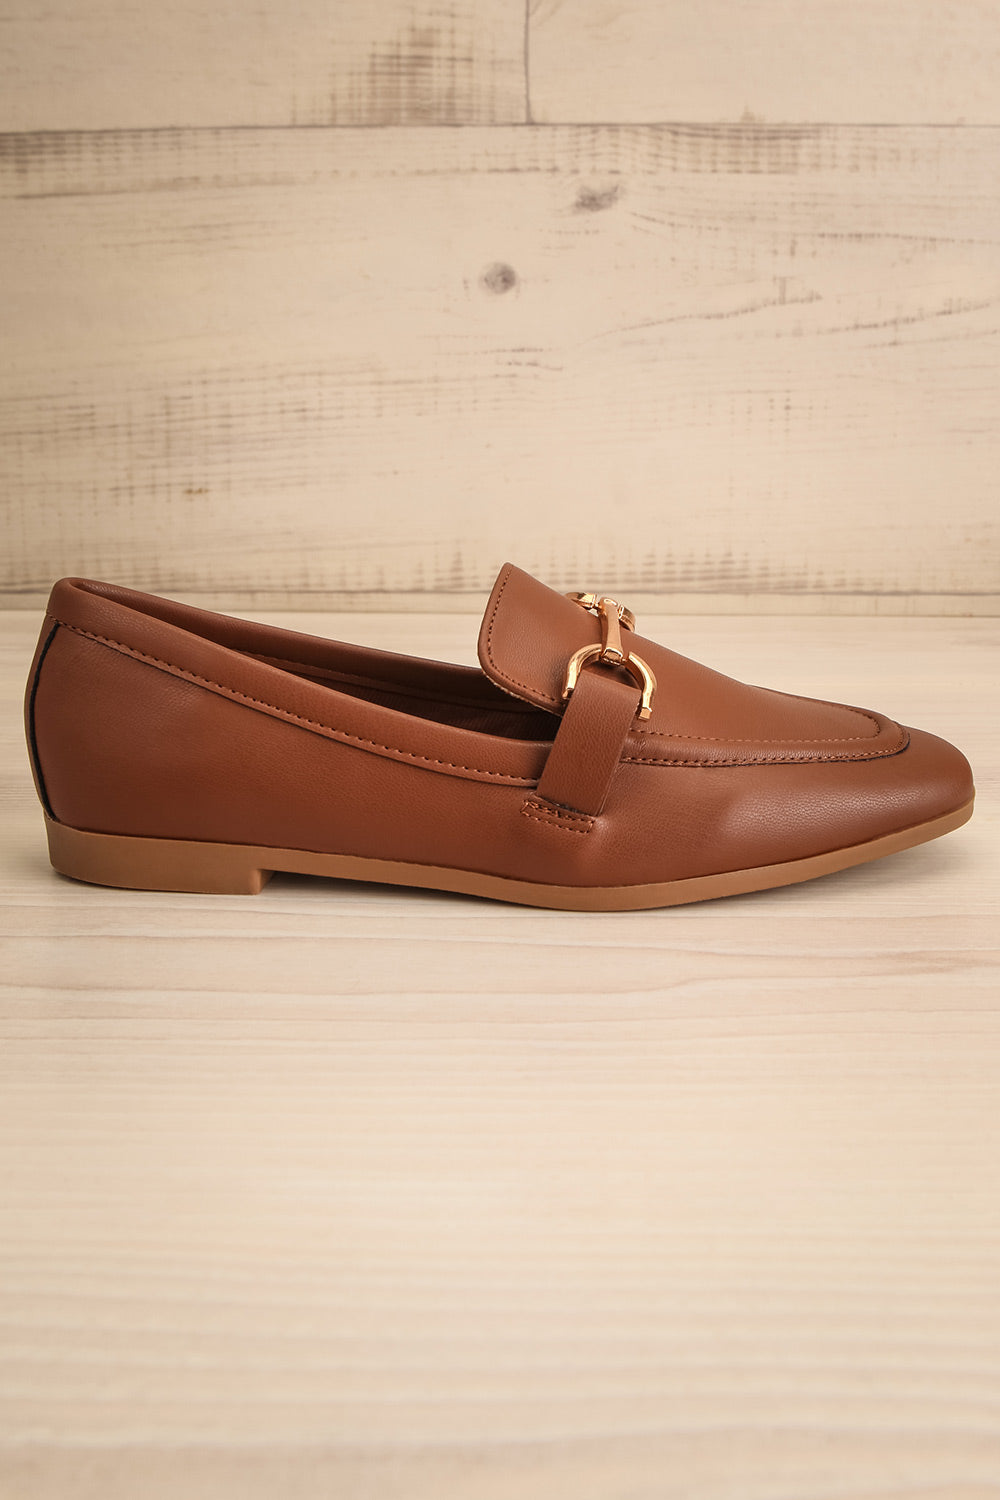 Picasso Brown Pointed Faux-Leather Loafers | La petite garçonne side view